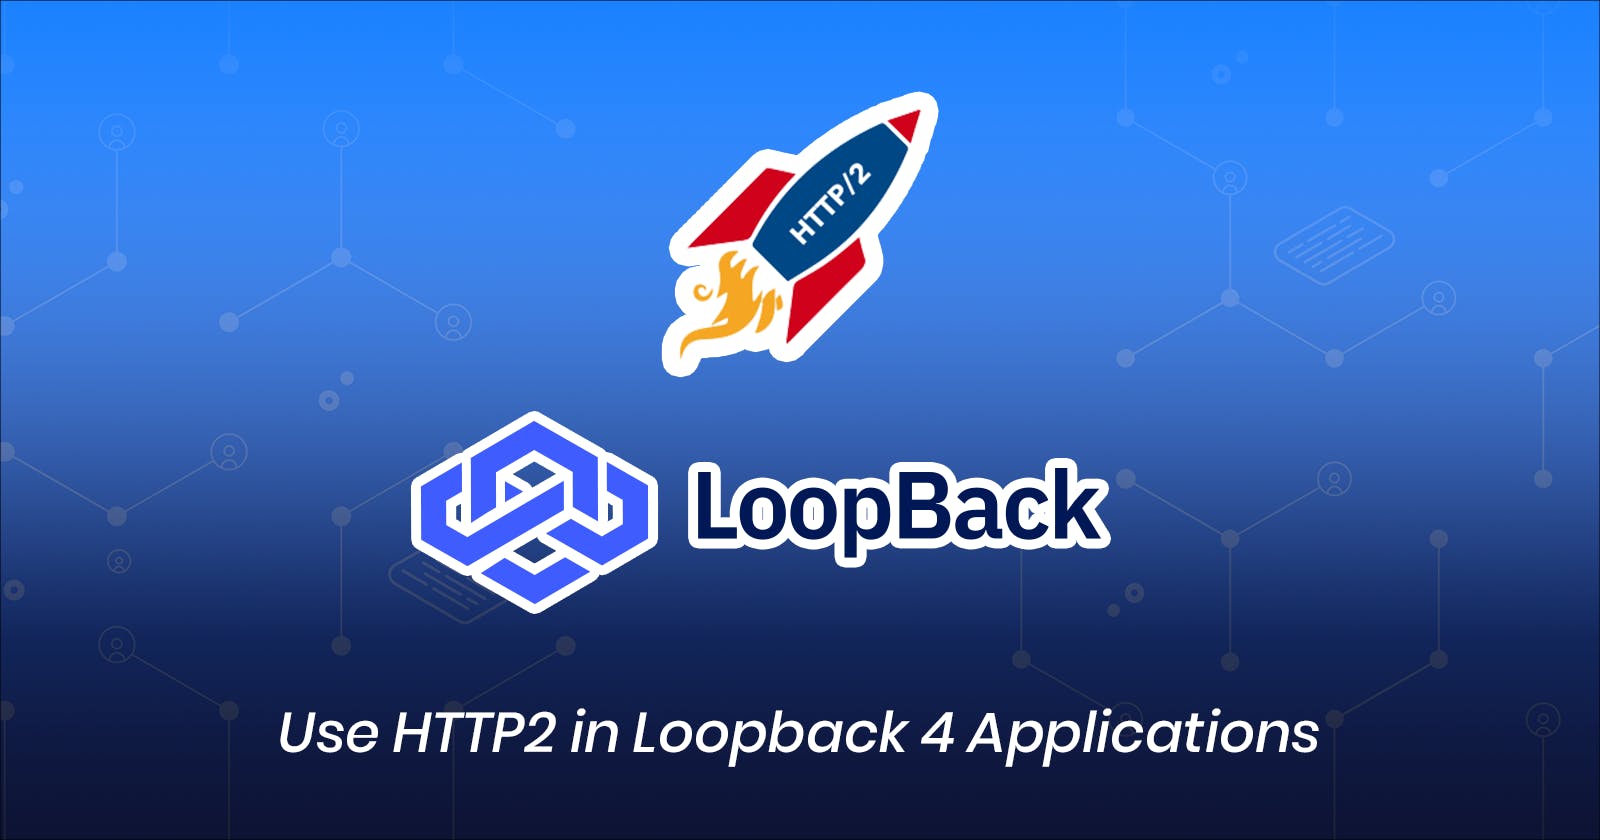 How to Use HTTP2 in Loopback 4 Applications?